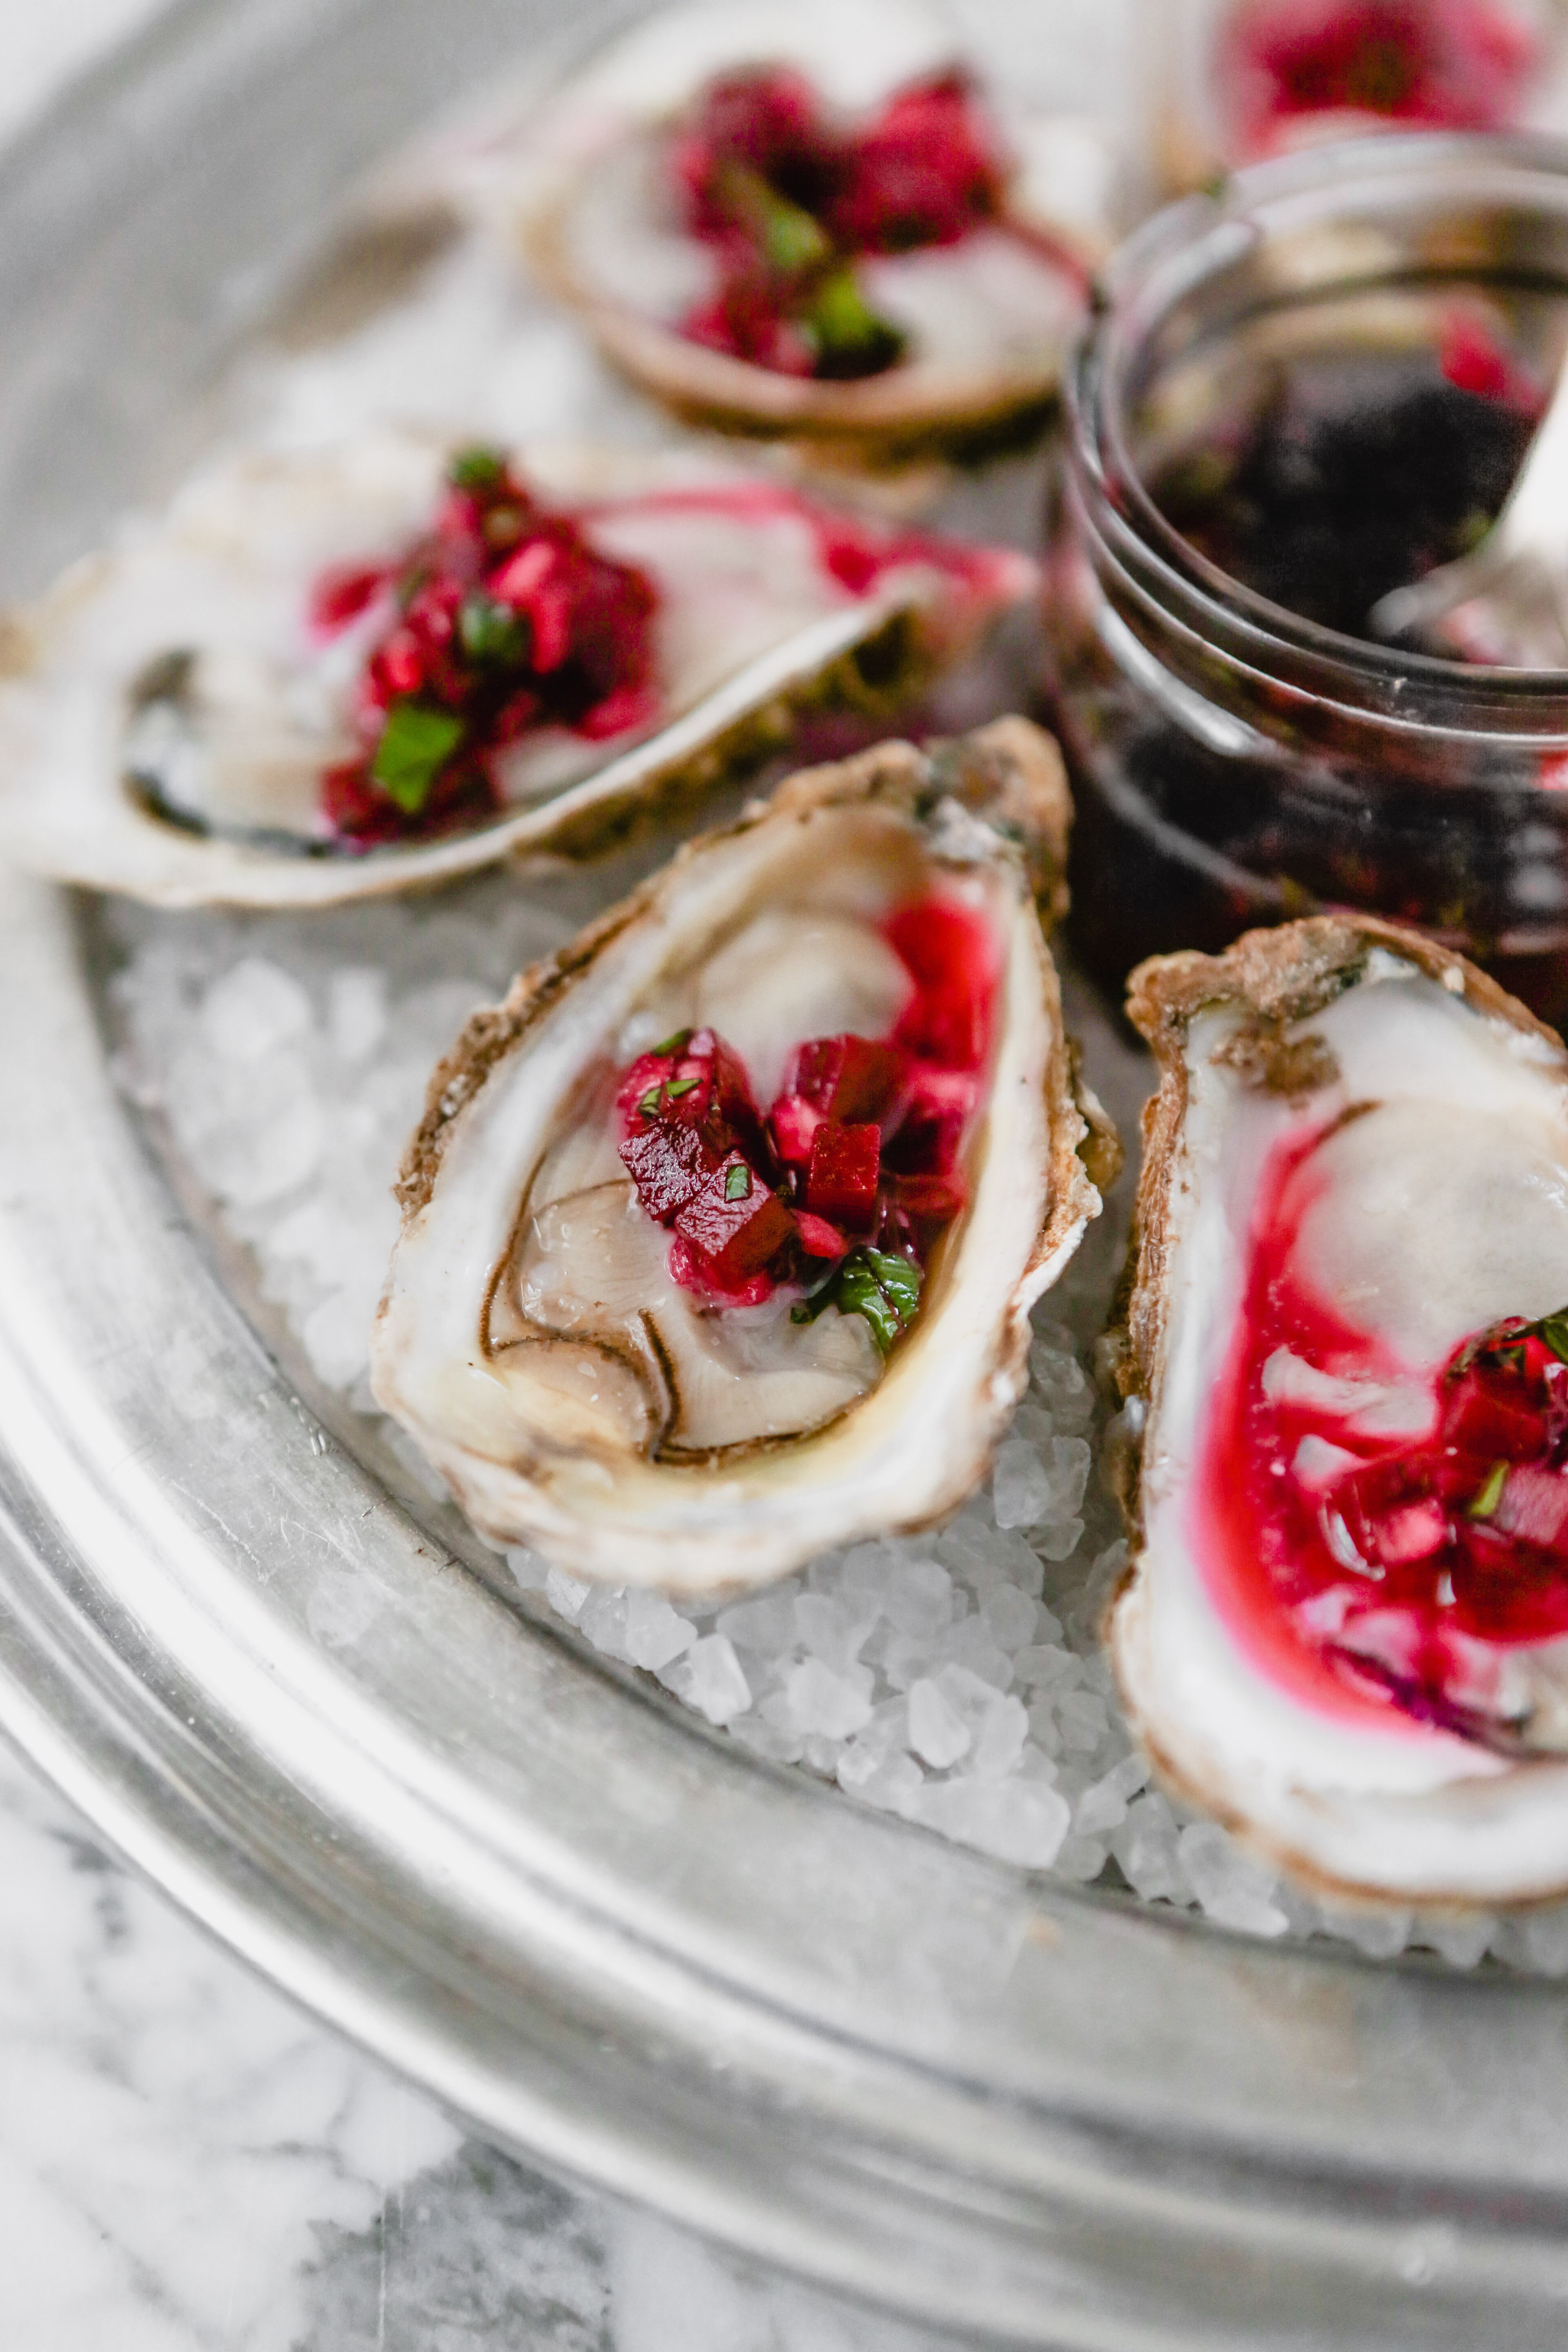 Photograph of oysters on the half shell set on rock salt in a metal pan on a marble surface, topped with a red mignonette sauce.